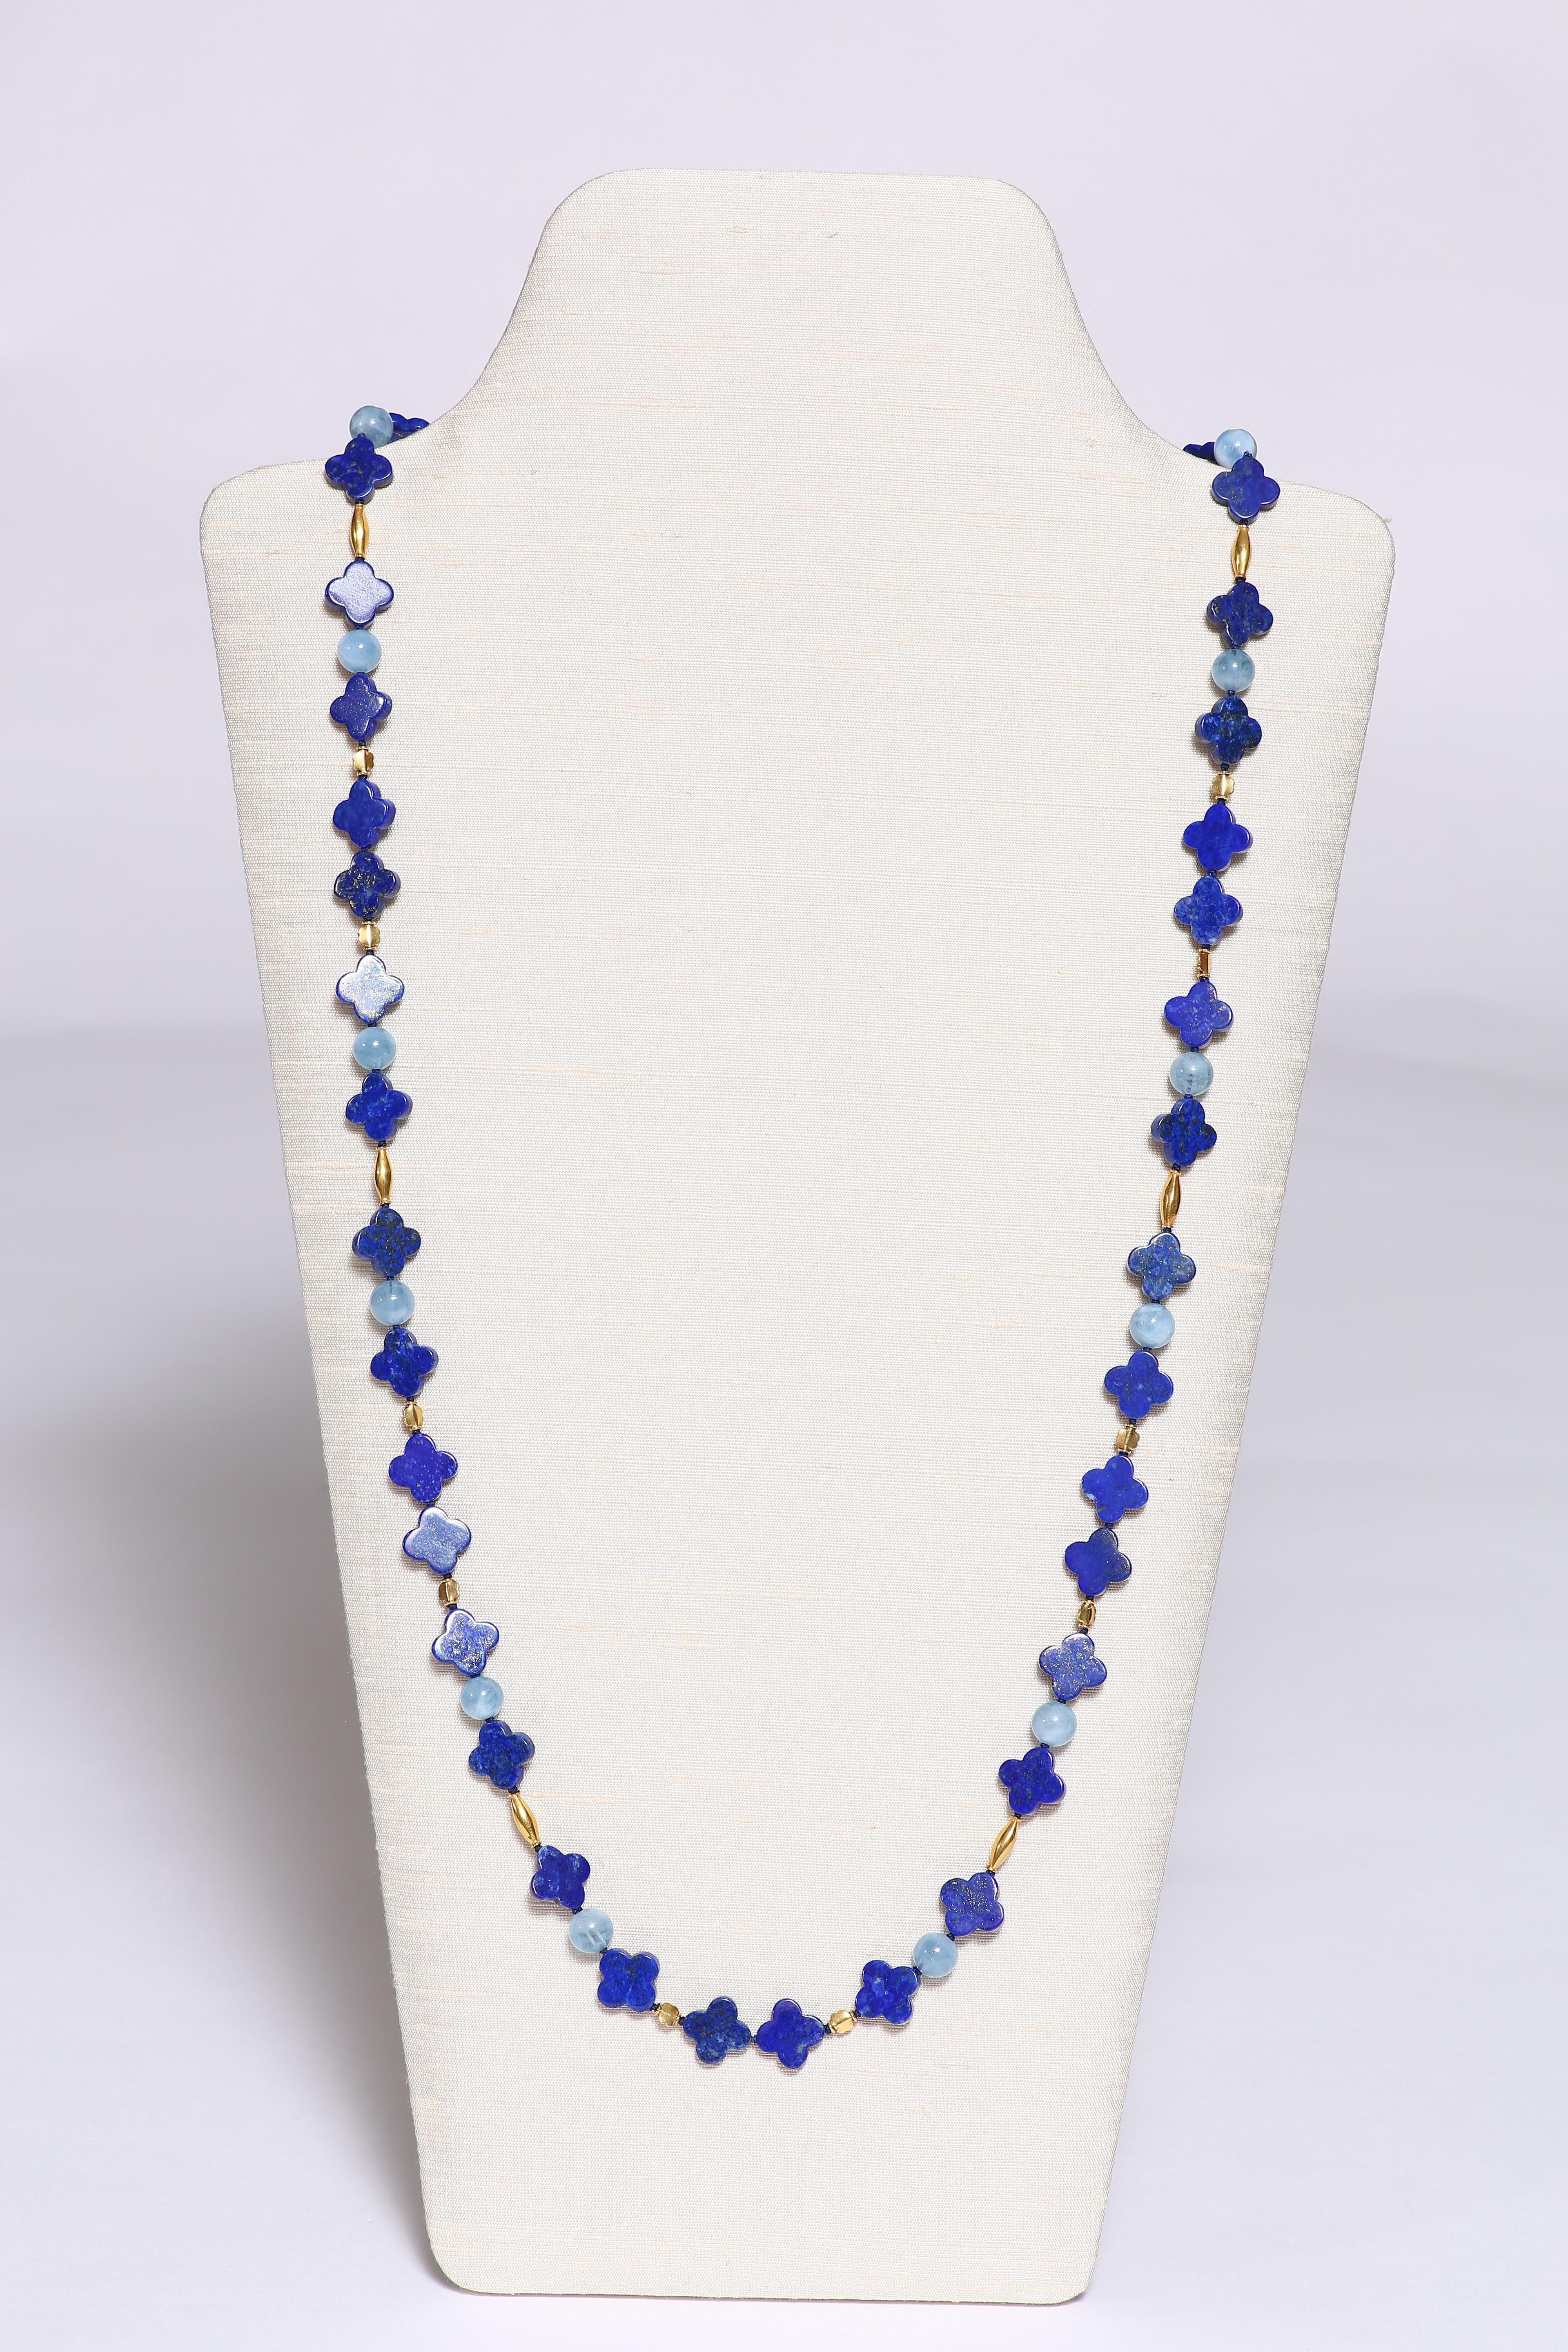 The vibrant blue colour of the quatrafoil lapiz beads are accentuated by round soft colour auuamarine beads and spaced by 18k gold faceted beads. The charming necklace at 37